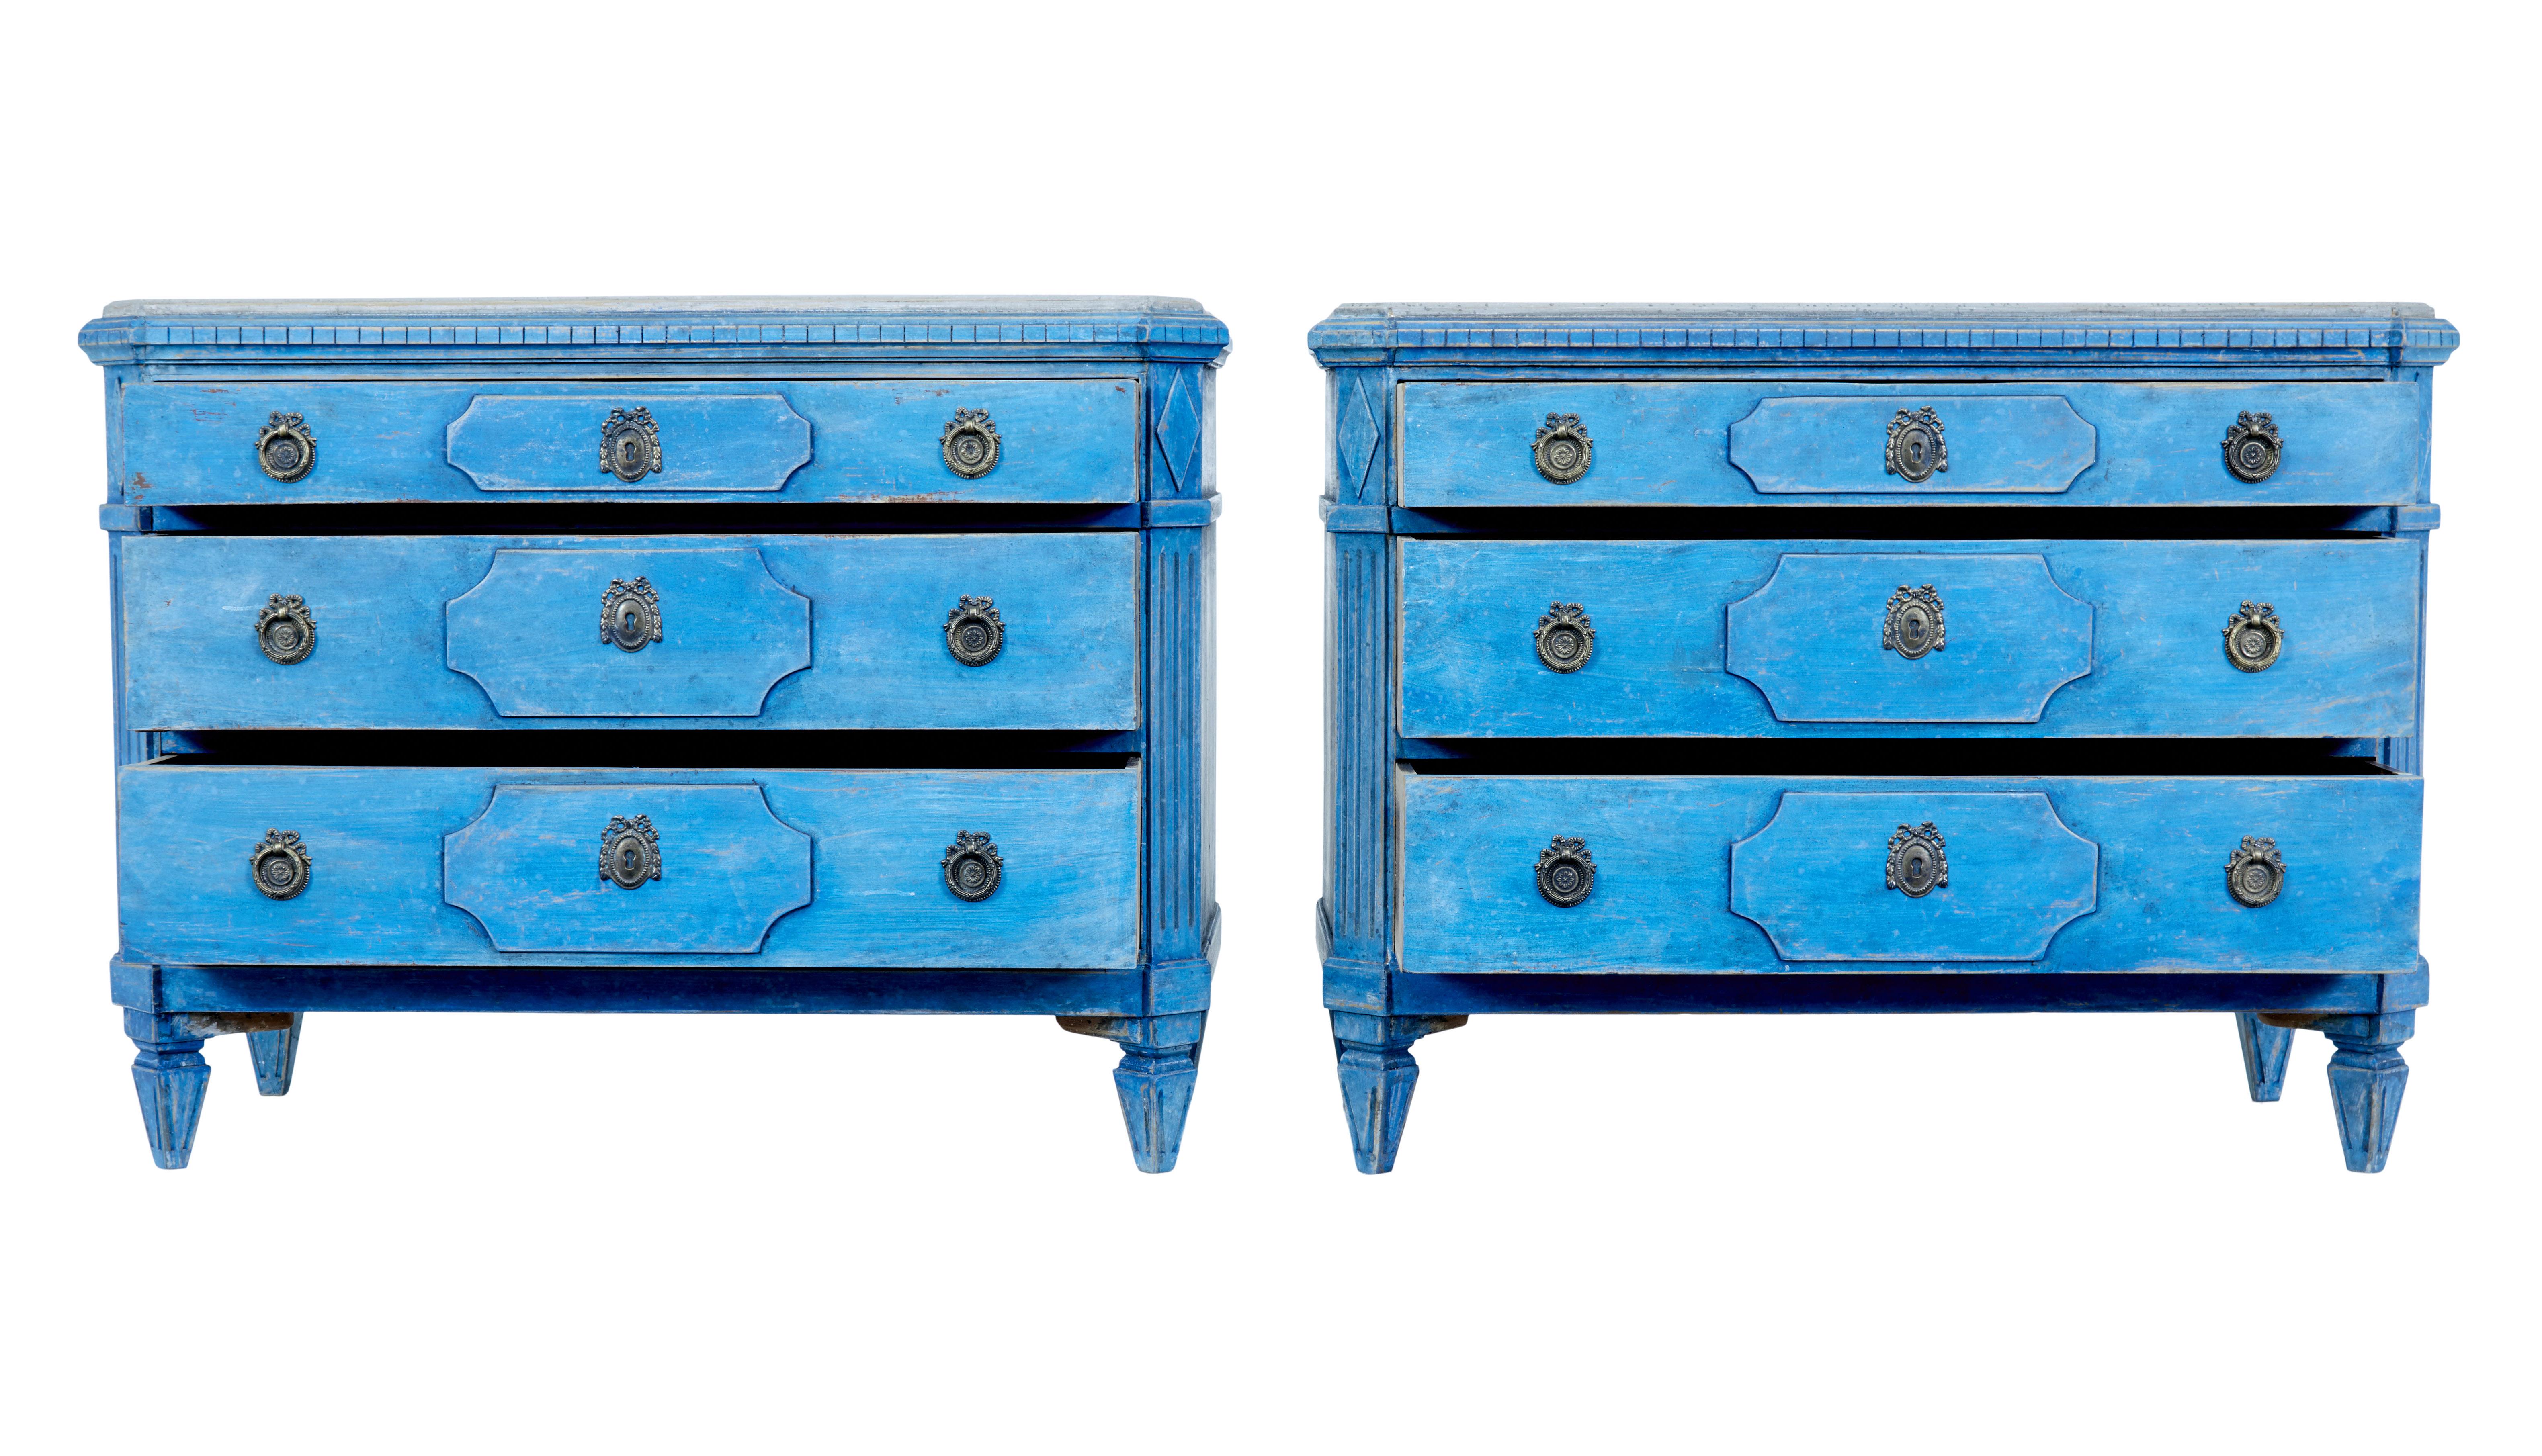 Pair of 19th century Swedish painted commodes, circa 1870.

Fine quality pair of Swedish oak chest of drawers painted in a striking blue with contrasting grey tops.

Top surface painted to a simulated marble effect, with a dentil detailing